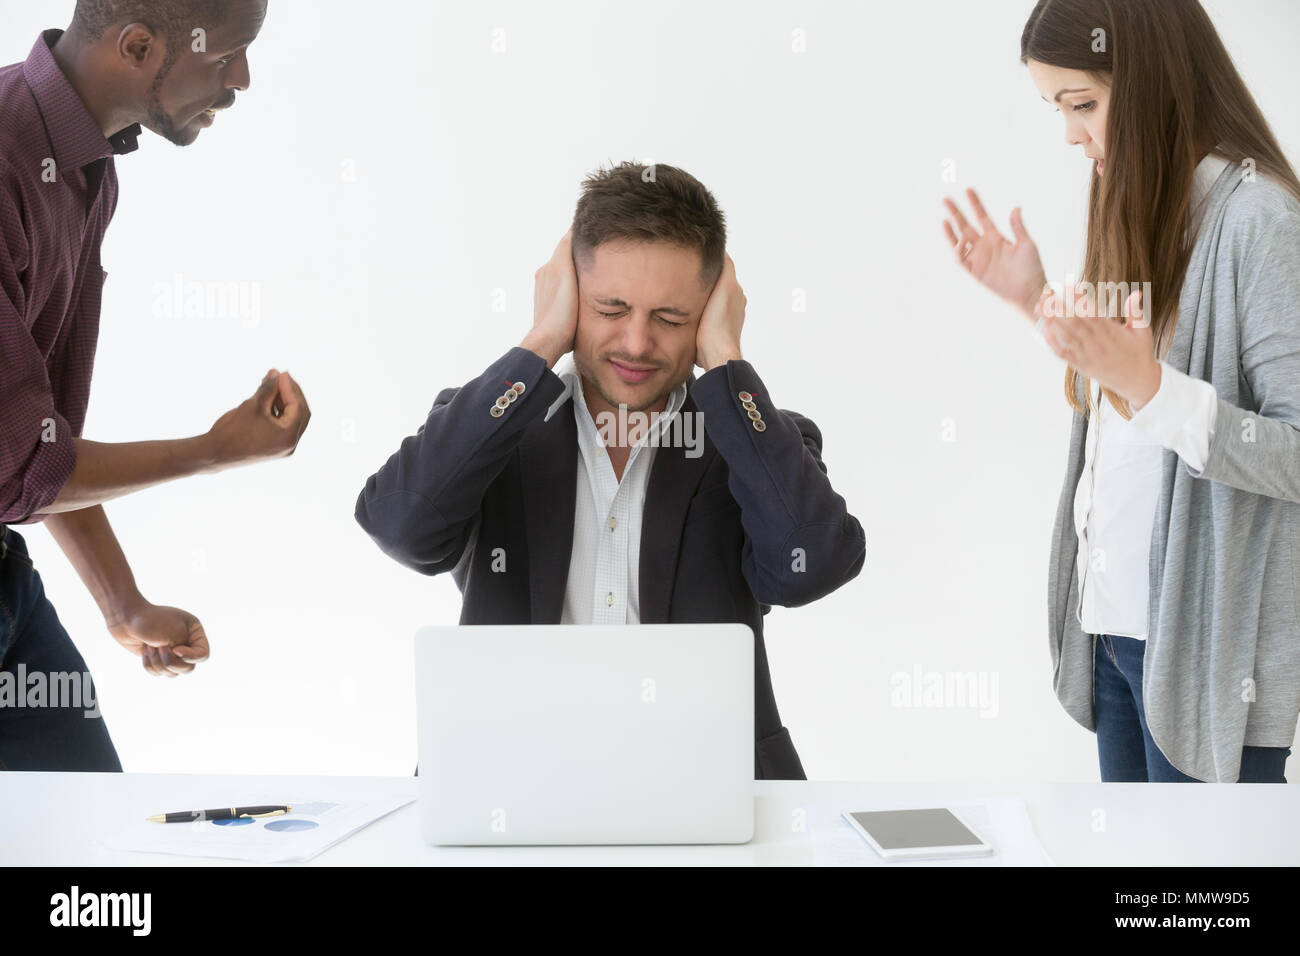 Tired from work or noise businessman closing ears with hands Stock Photo